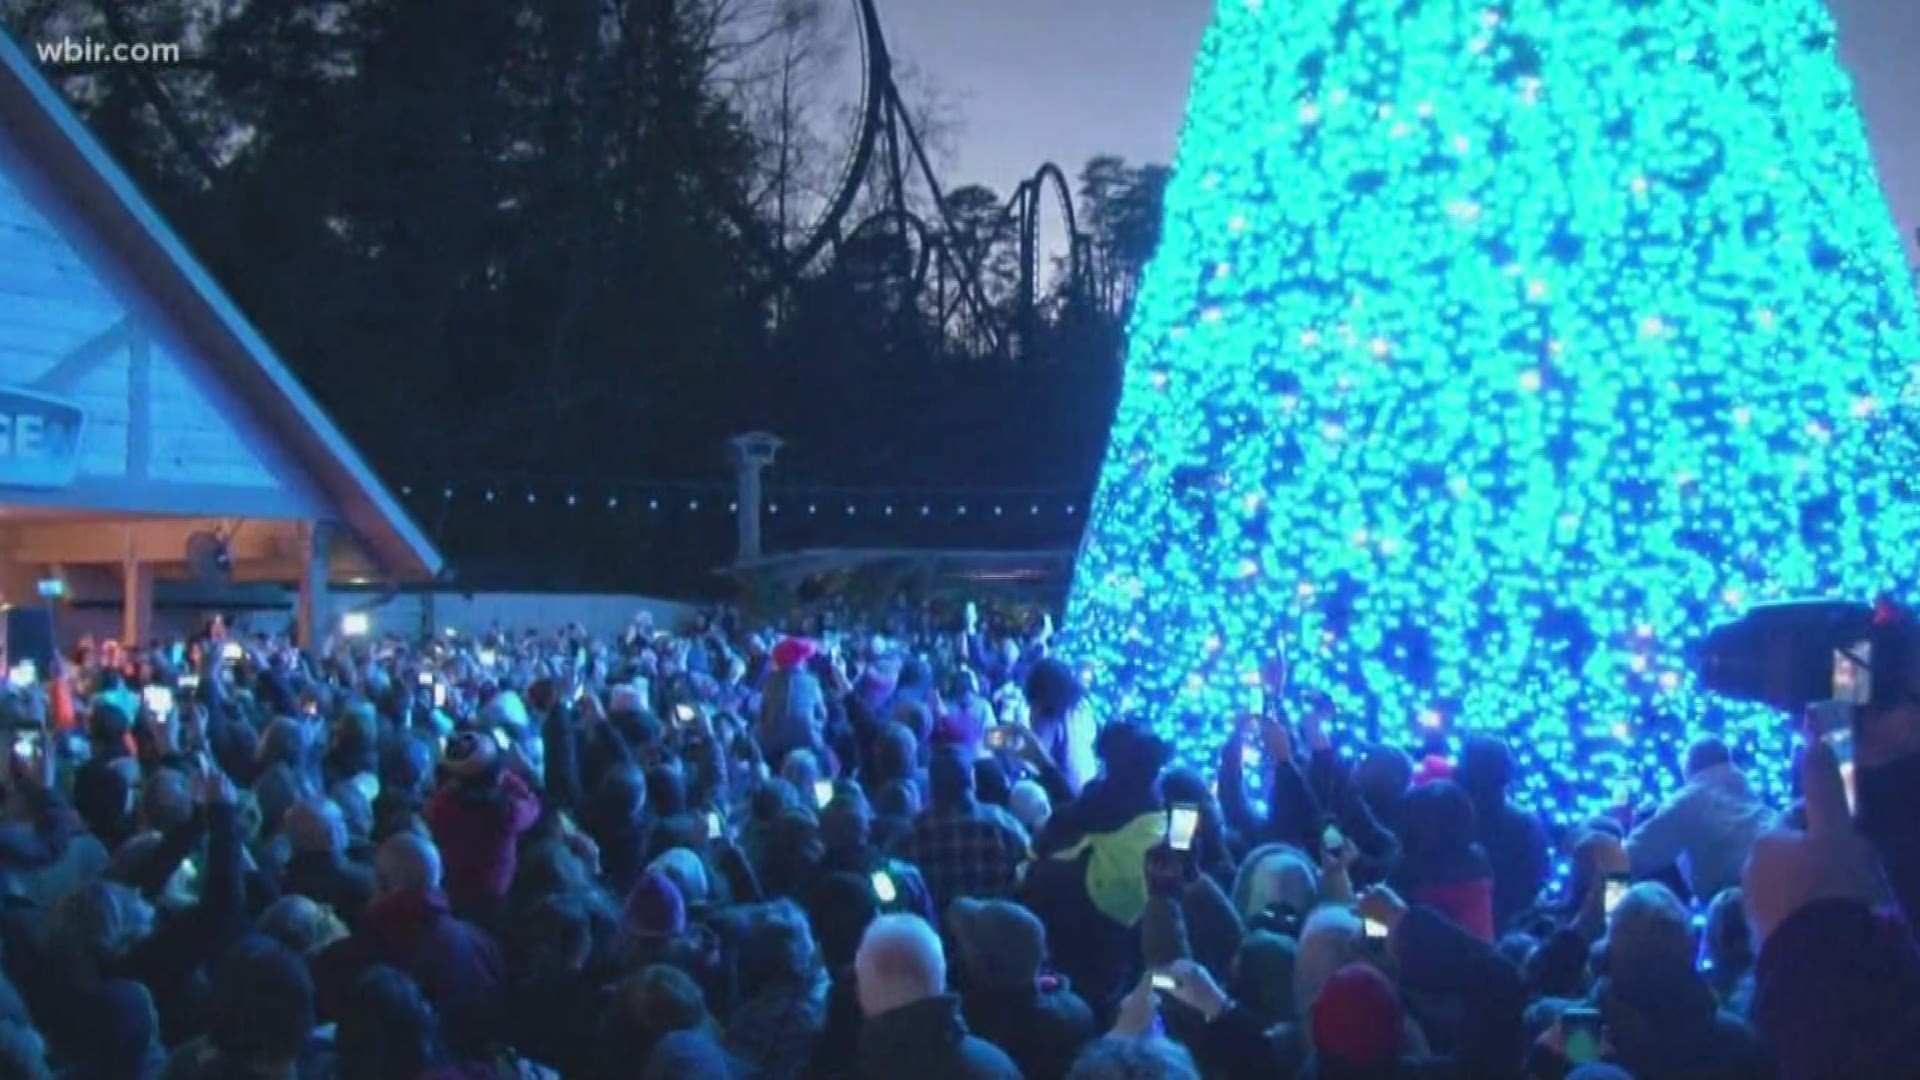 Dollywood is now home to 5 million glowing Christmas lights and a 50 foot tall Christmas tree.